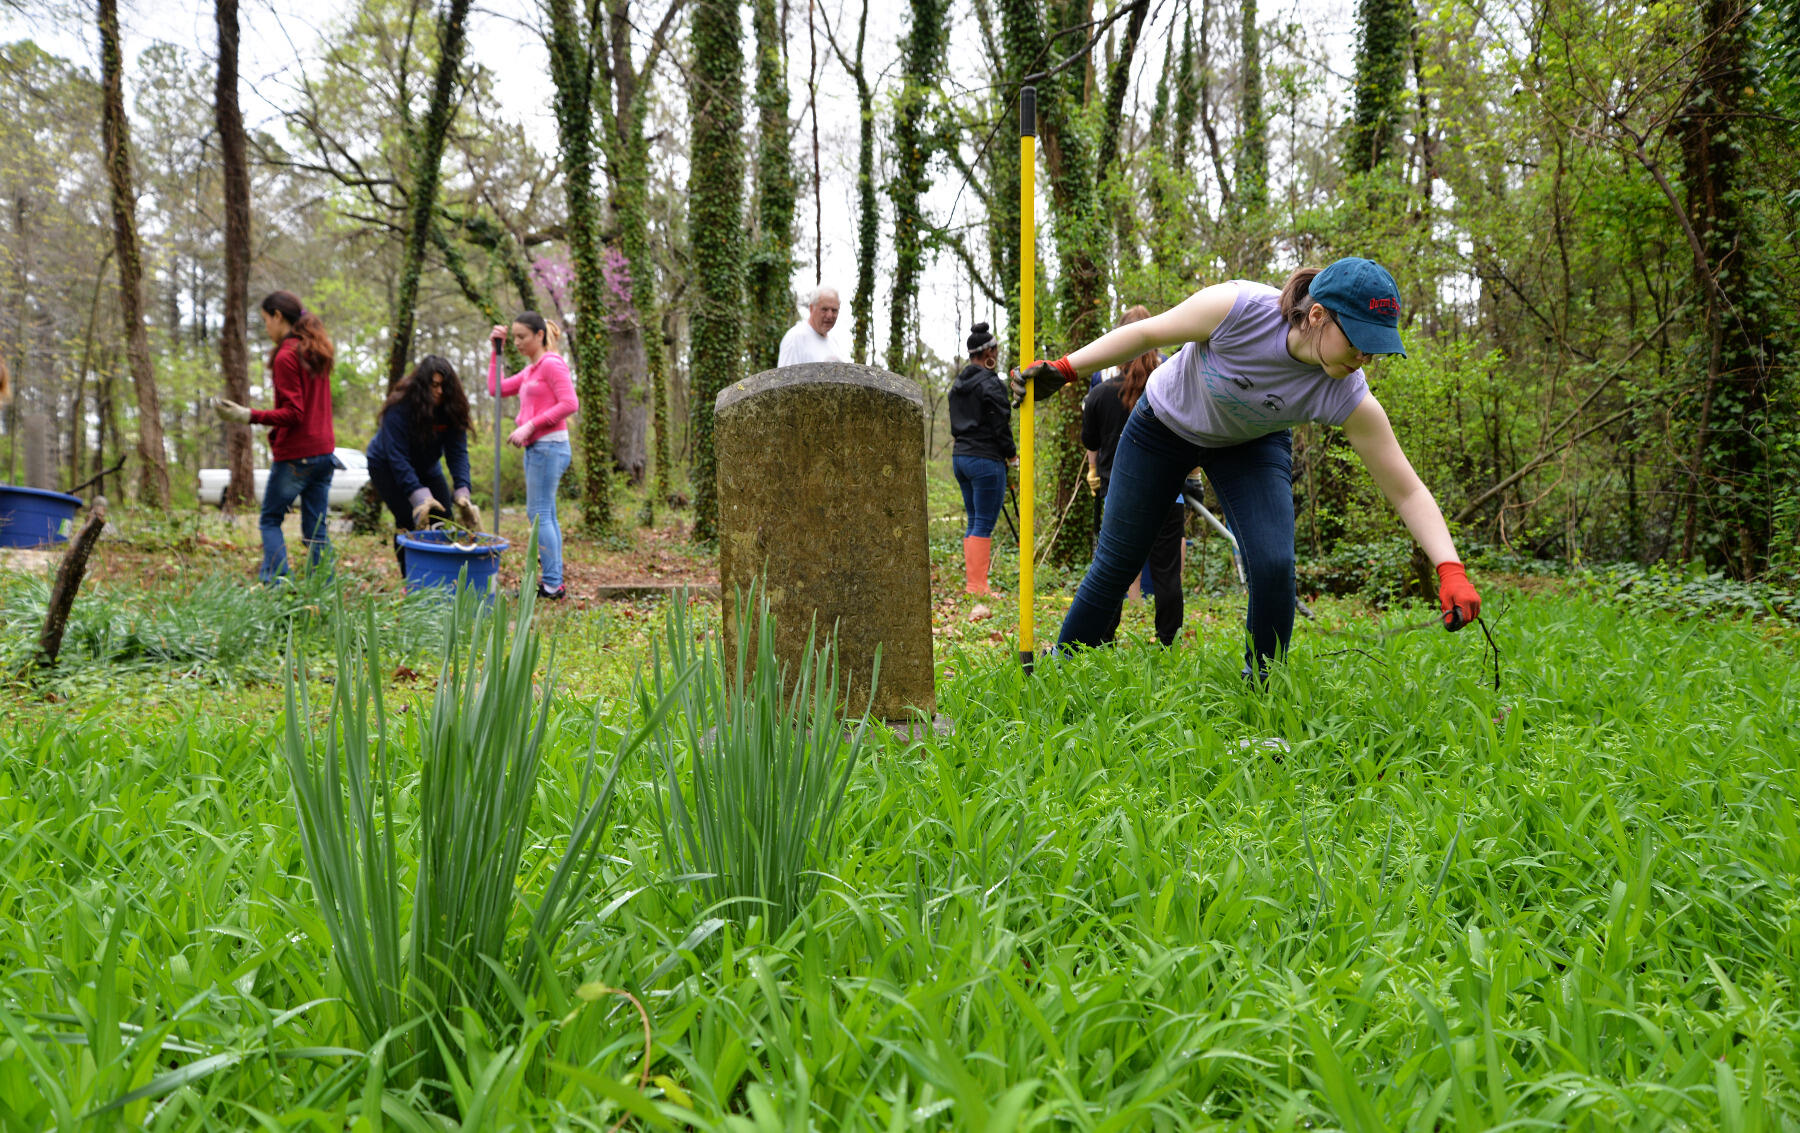 Madison Price, a junior sociology major, picks up sticks and debris from an overgrown cemetery plot at East End Cemetery.